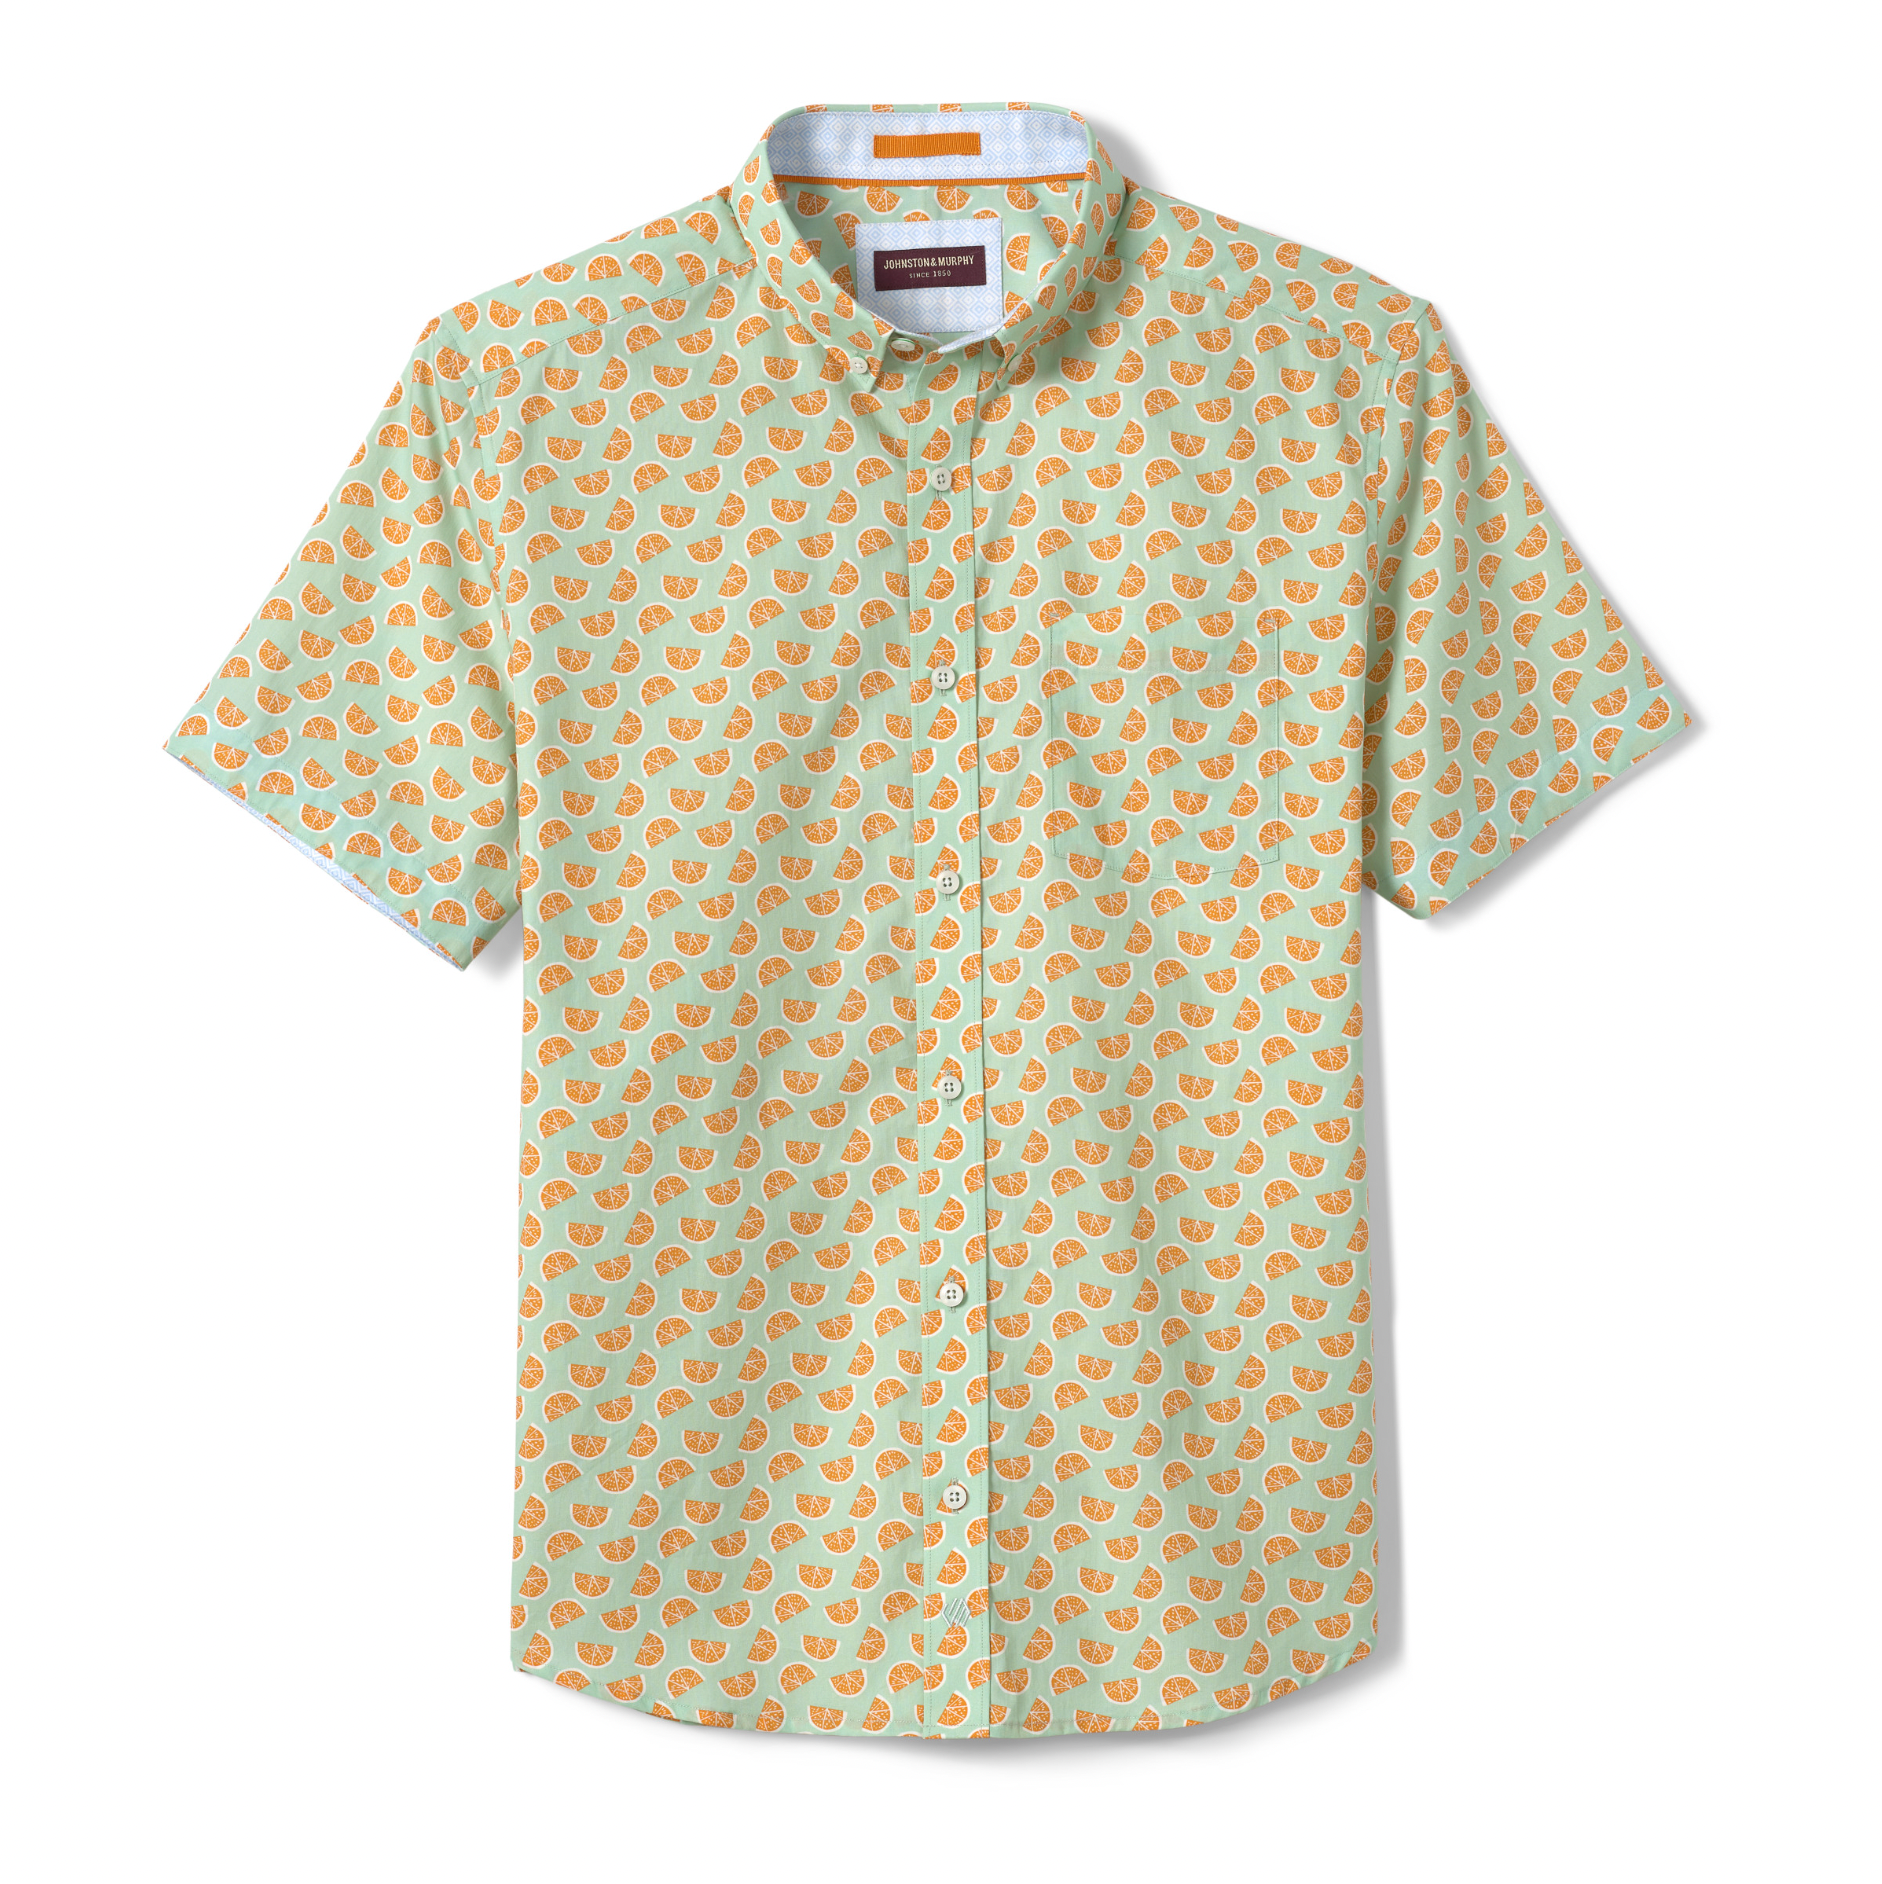 Upgrade your spring wardrobe with the Johnston&Murphy Short Sleeve Shirt. Stay comfortable and stylish while enjoying the warmer weather.